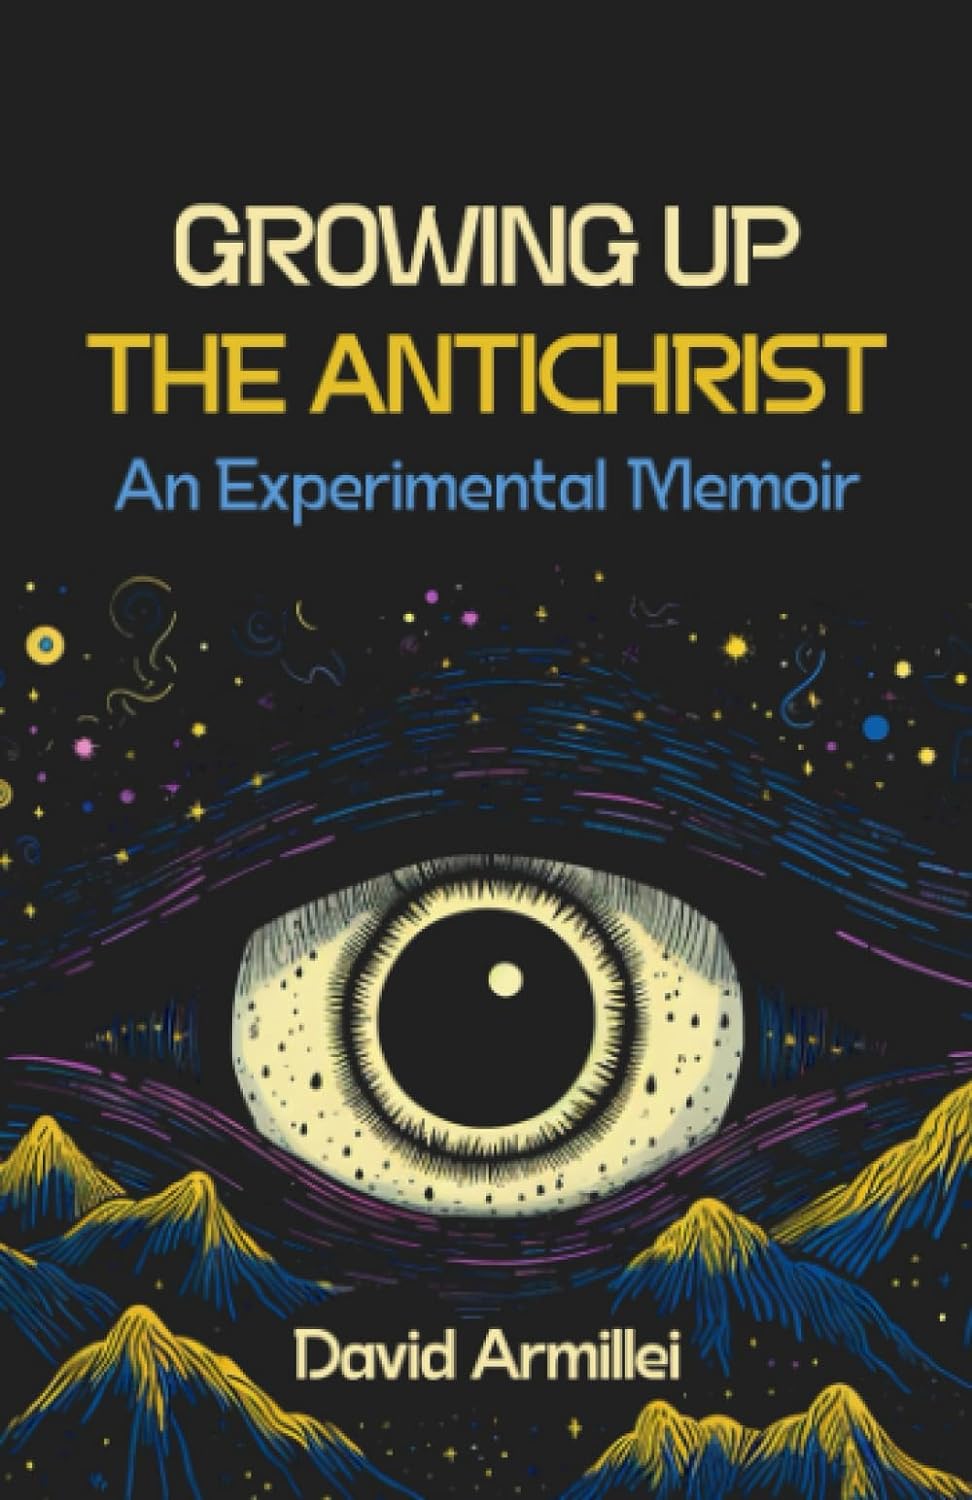 New book "Growing Up the Antichrist" by David Armillei is released, an experimental memoir combining poetry, life lessons, and personal history about balancing a complex life